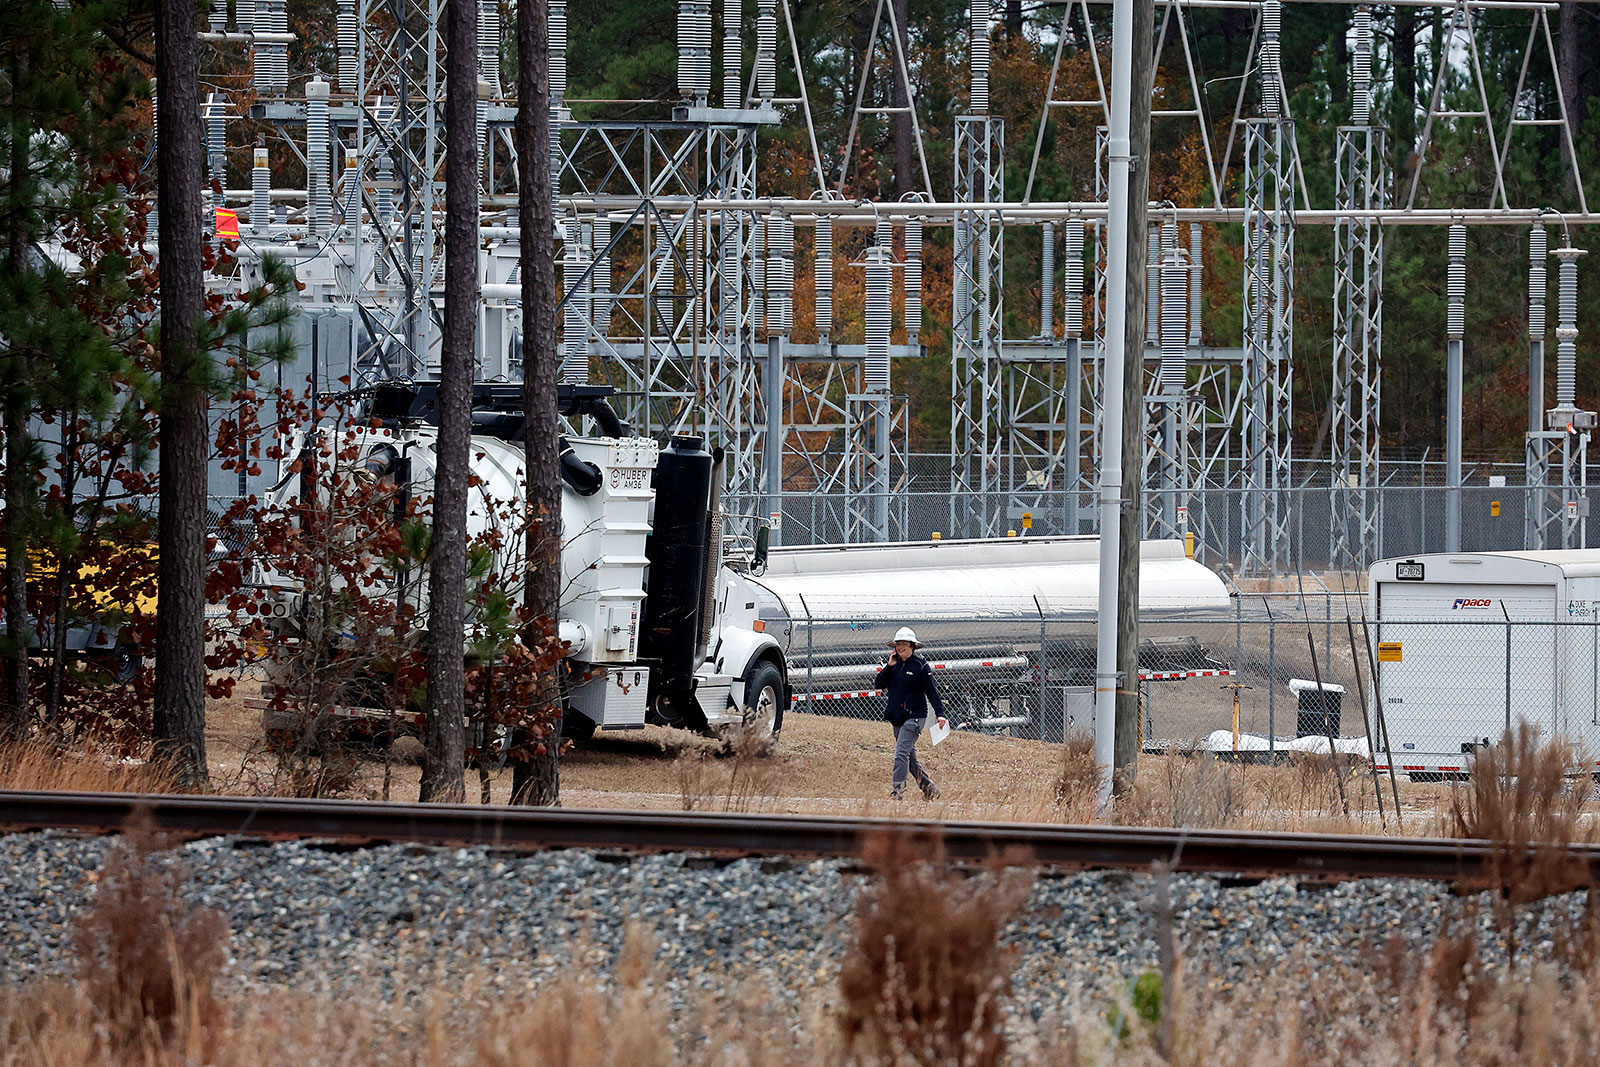 Workers work on equipment at the West End Substation in West End, North Carolina, on Monday, December 5.